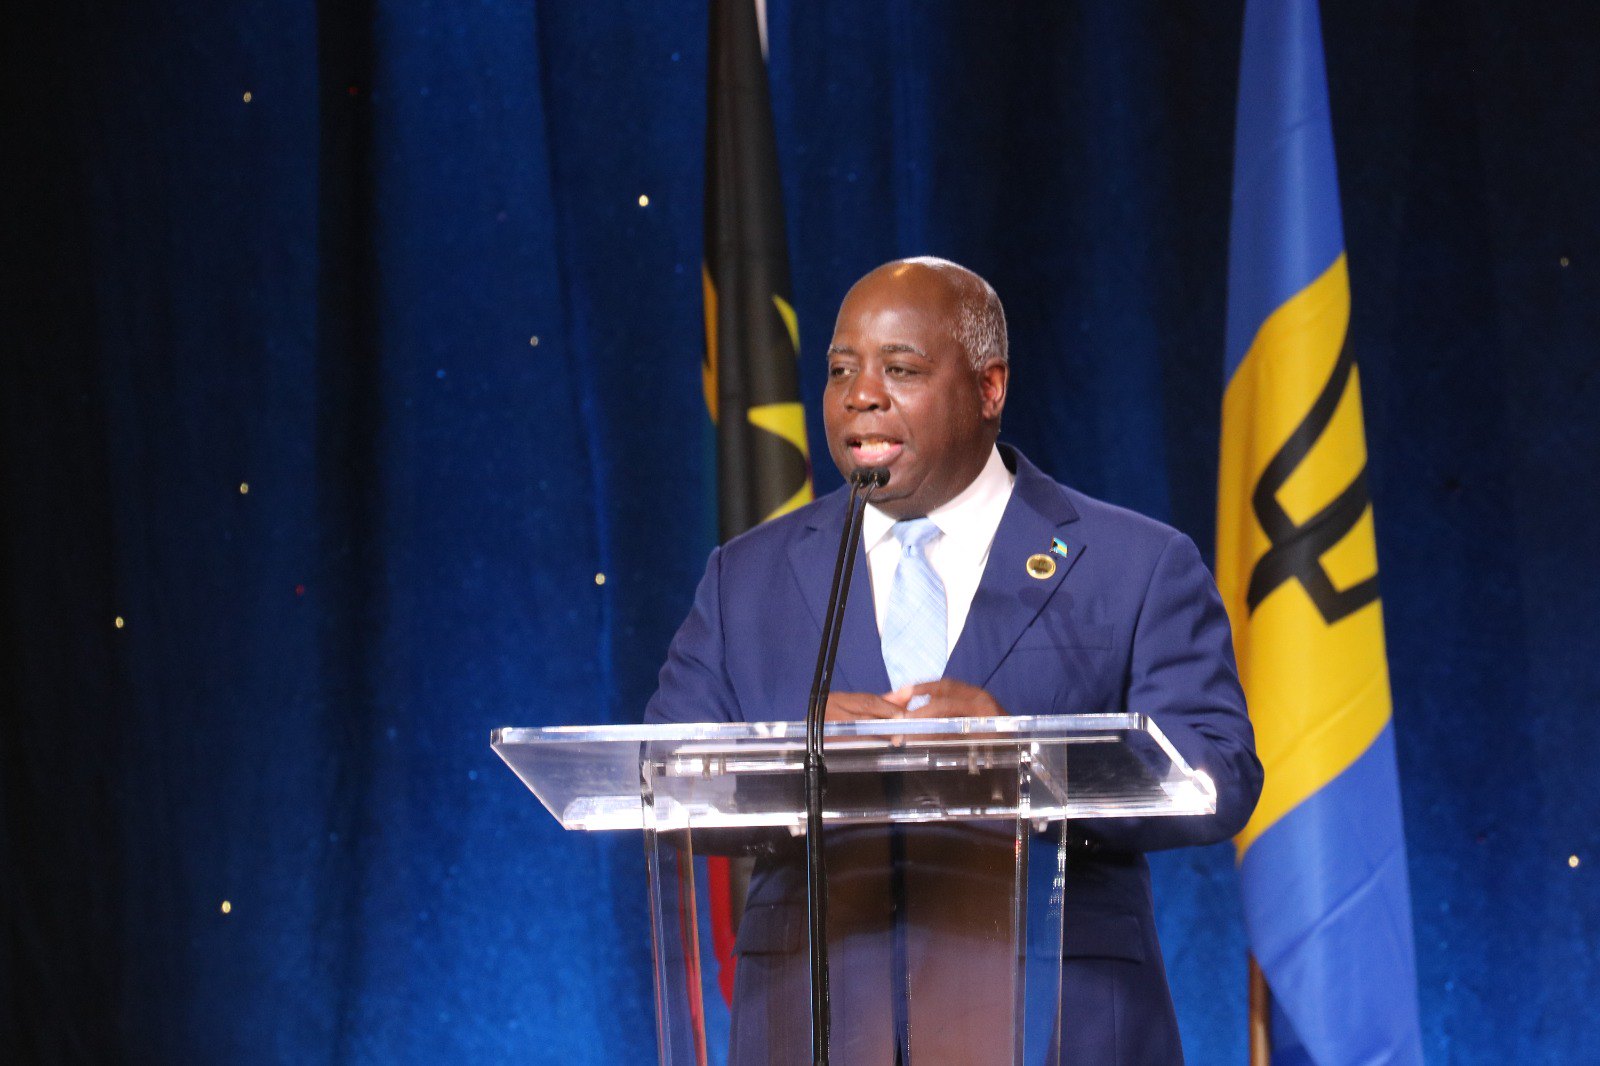 Philip Davis, prime minister of The Bahamas, delivering his opening remarks at the CARICOM Summit held in Nassau, the capital of The Bahamas. Photo: CARICOM.